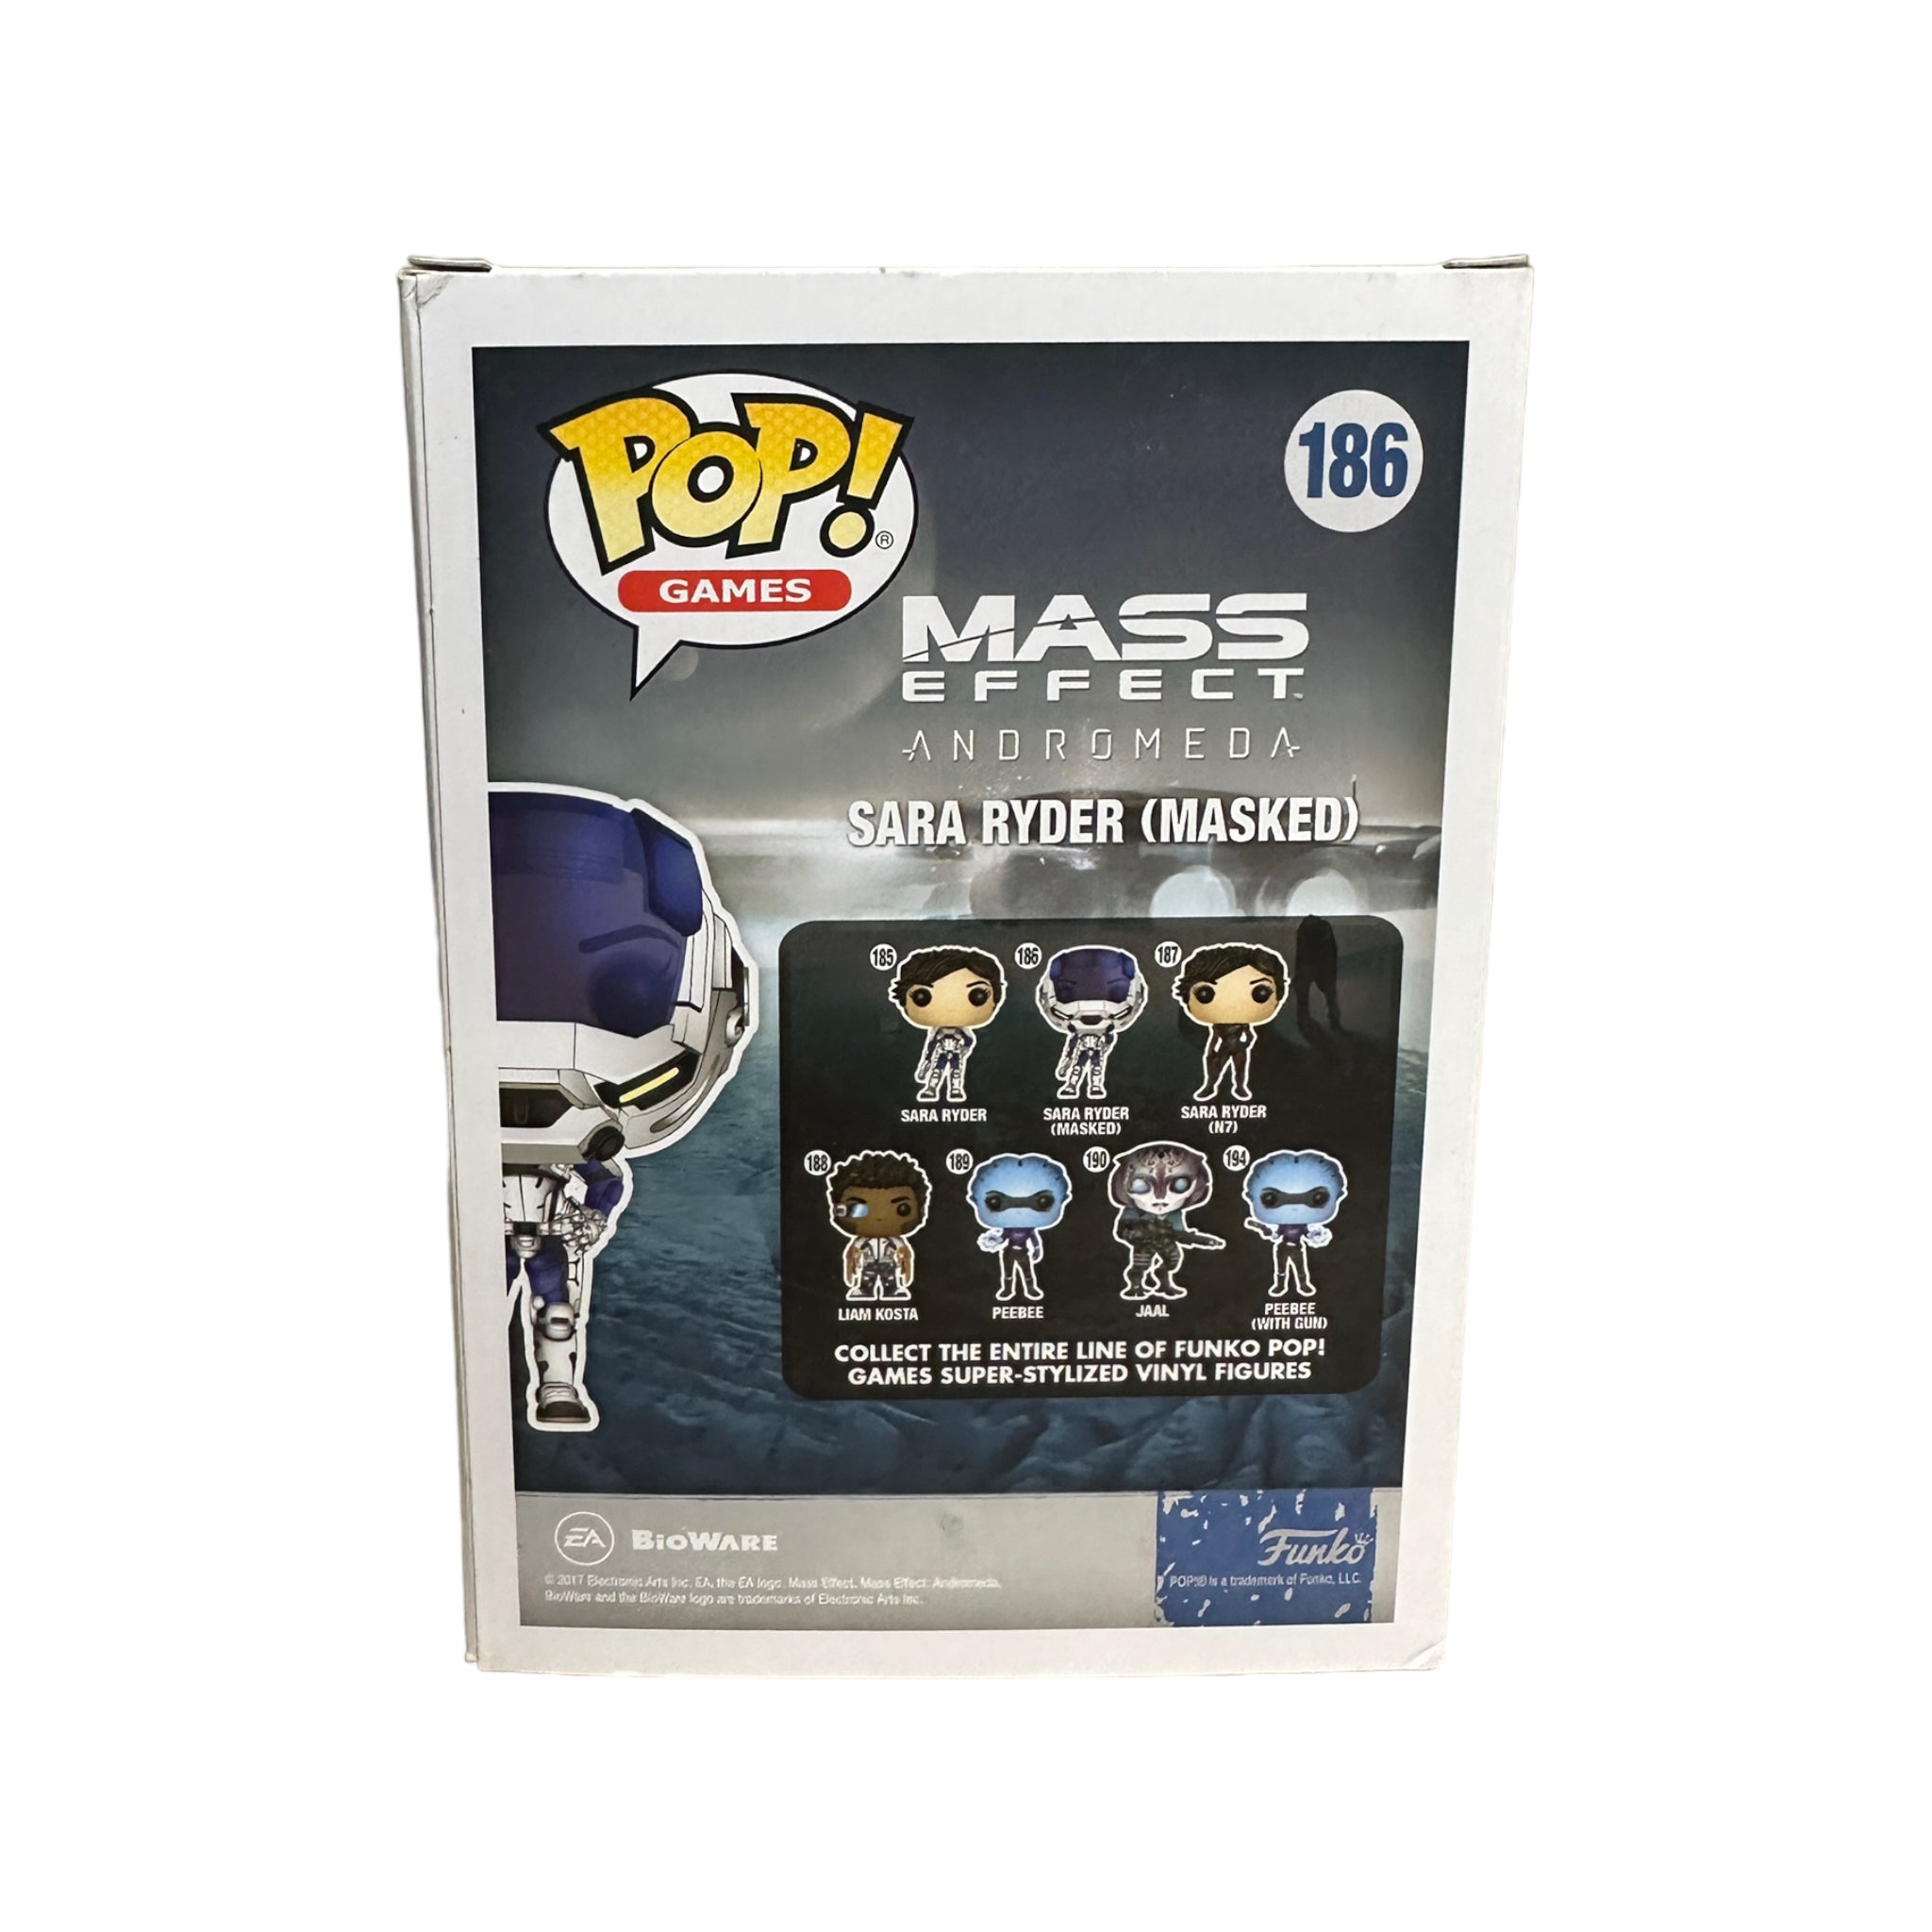 Sara Ryder (Masked) #186 Funko Pop! - Mass Effect: Andromeda - GameStop Exclusive - Condition 8/10